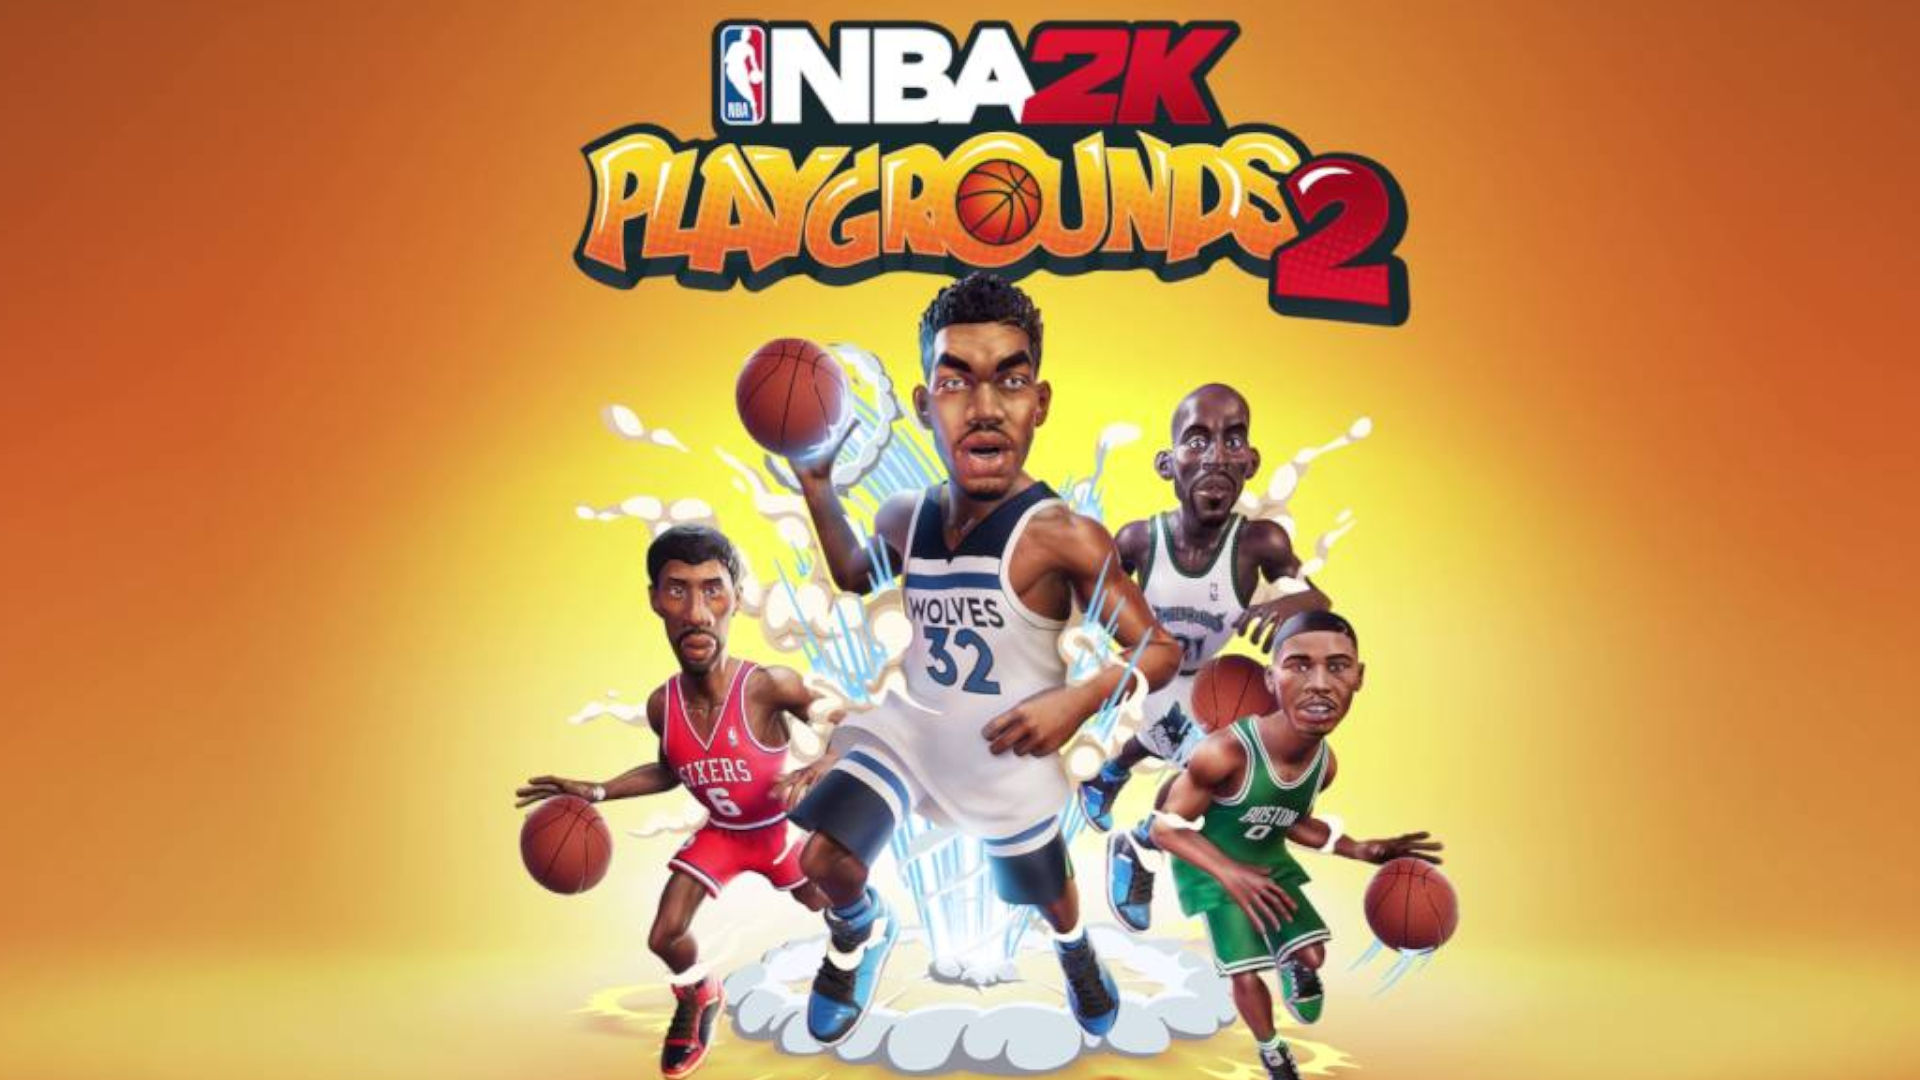 Cover art for NBA 2K Playgrounds 2, one of the arcade basketball games on Switch